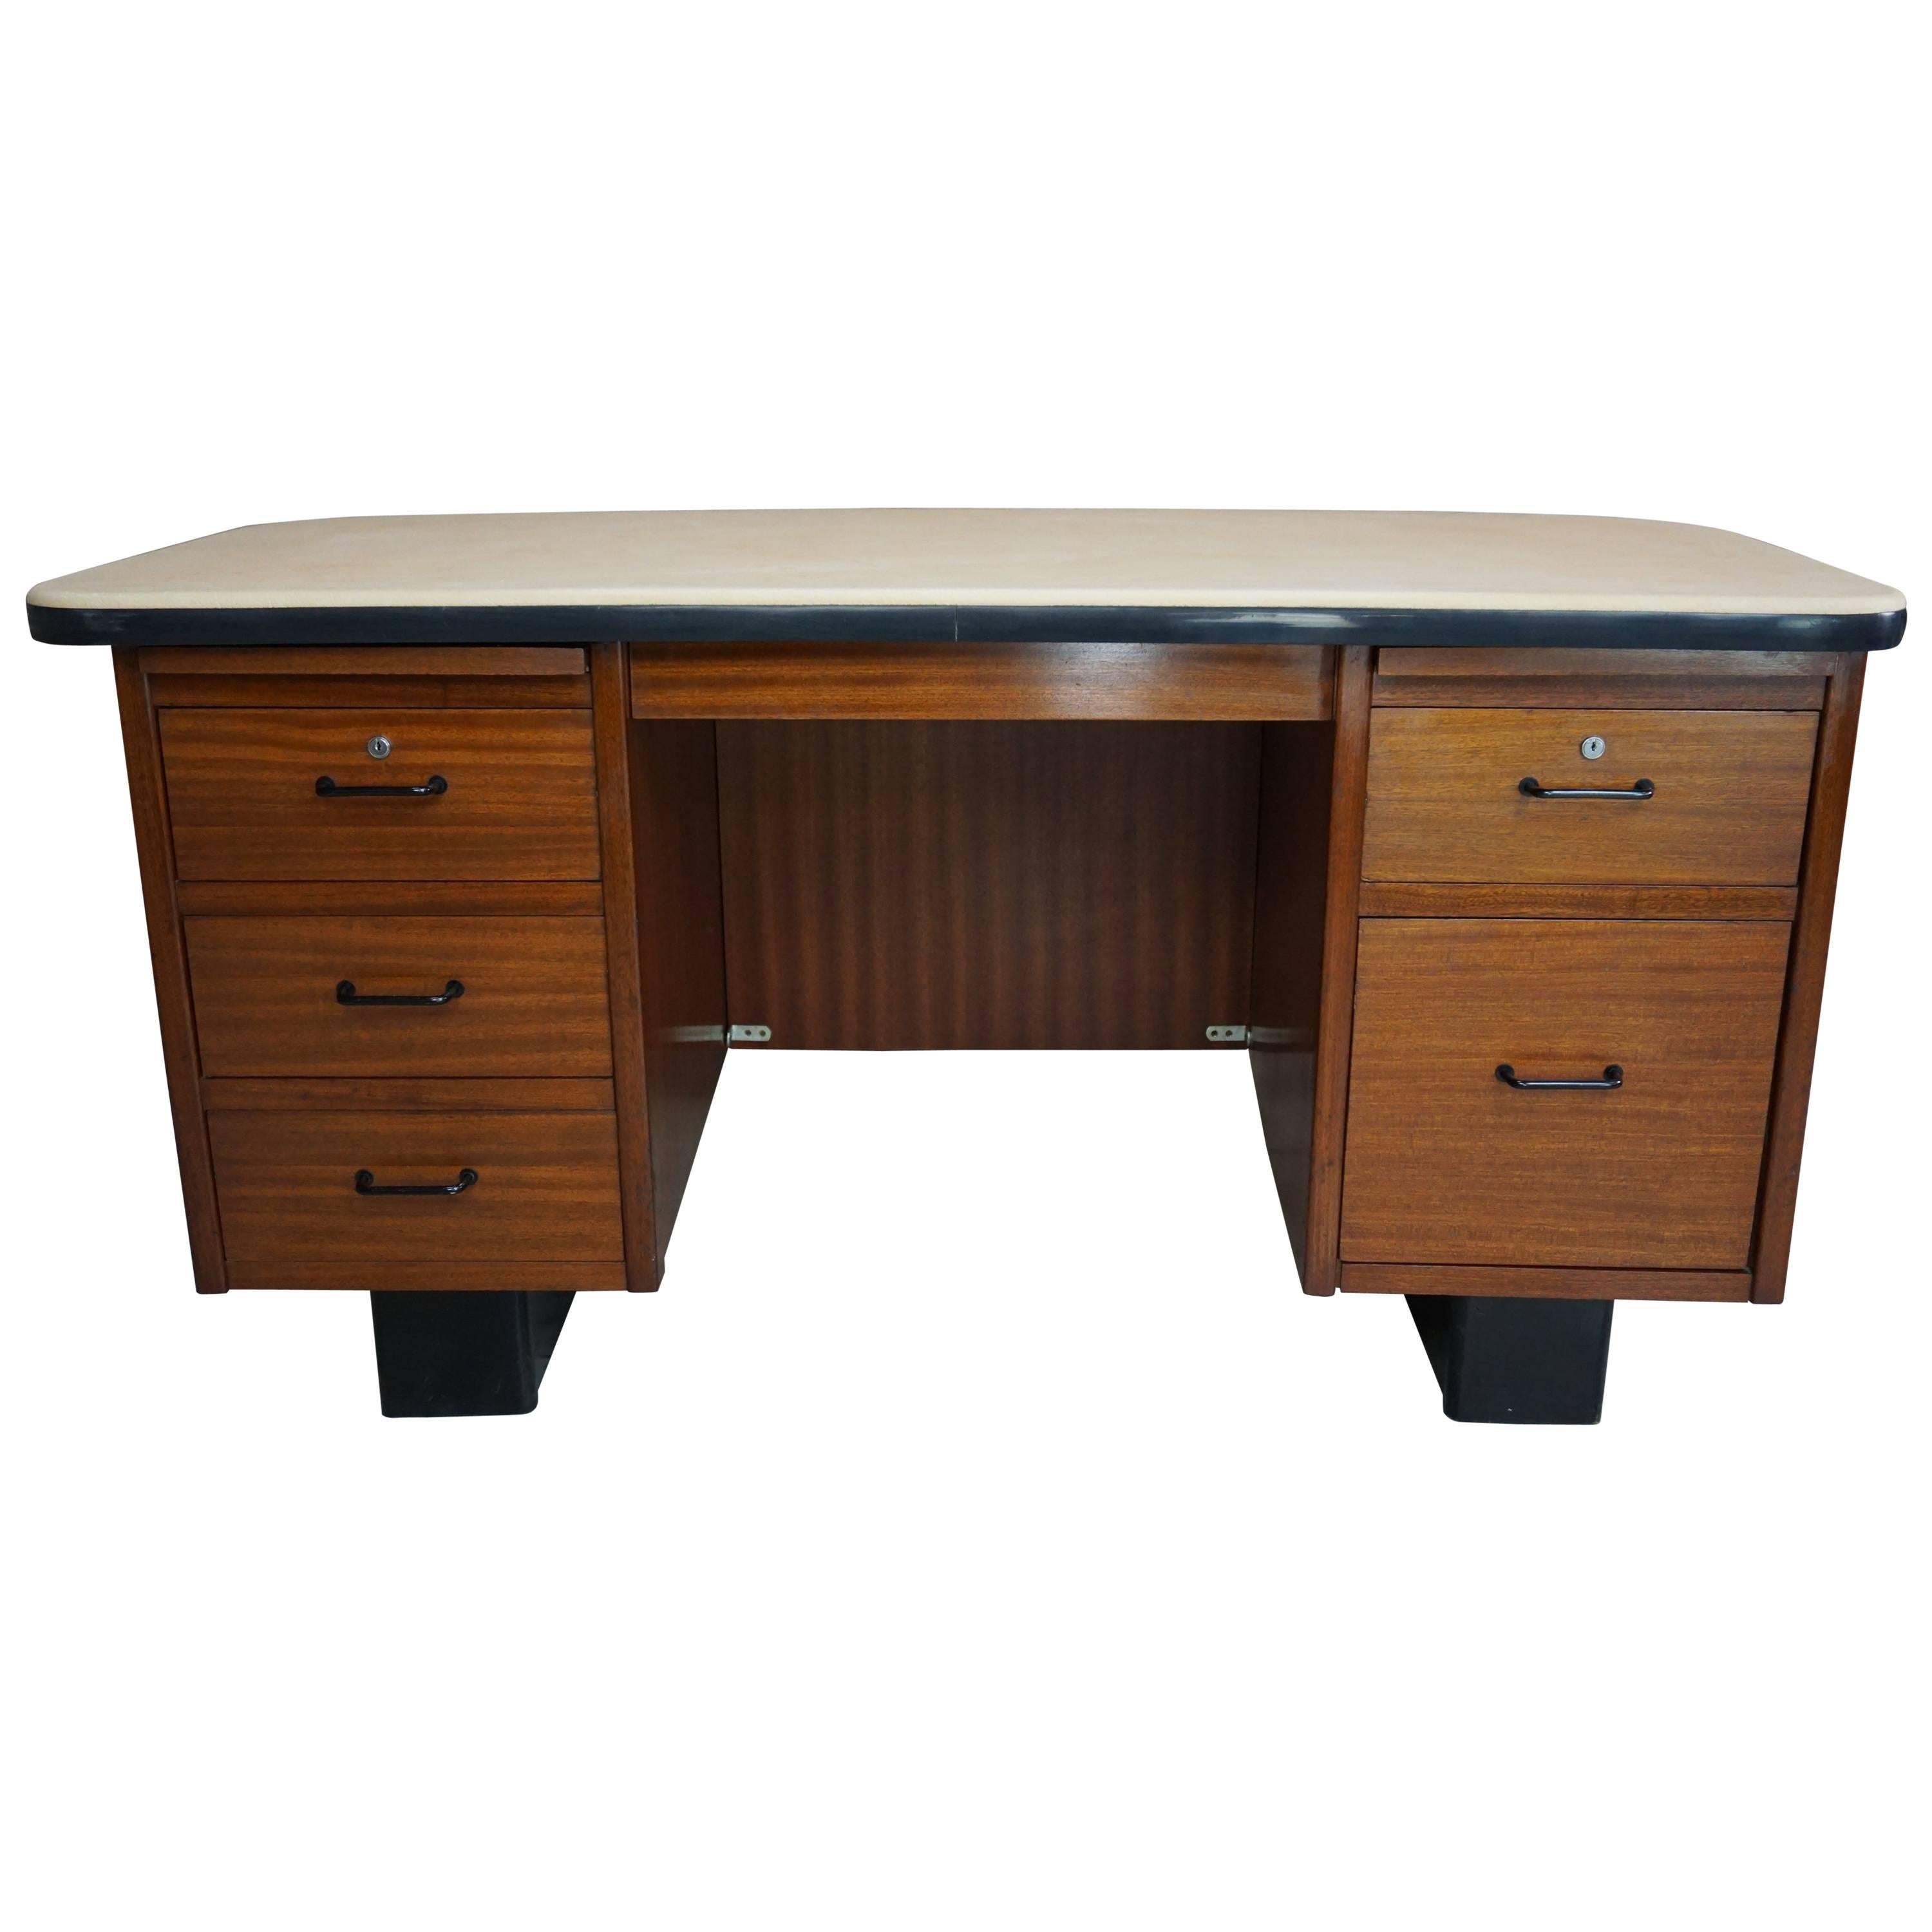 Teak Executive Desk French Design from the 1950s Art Deco Style